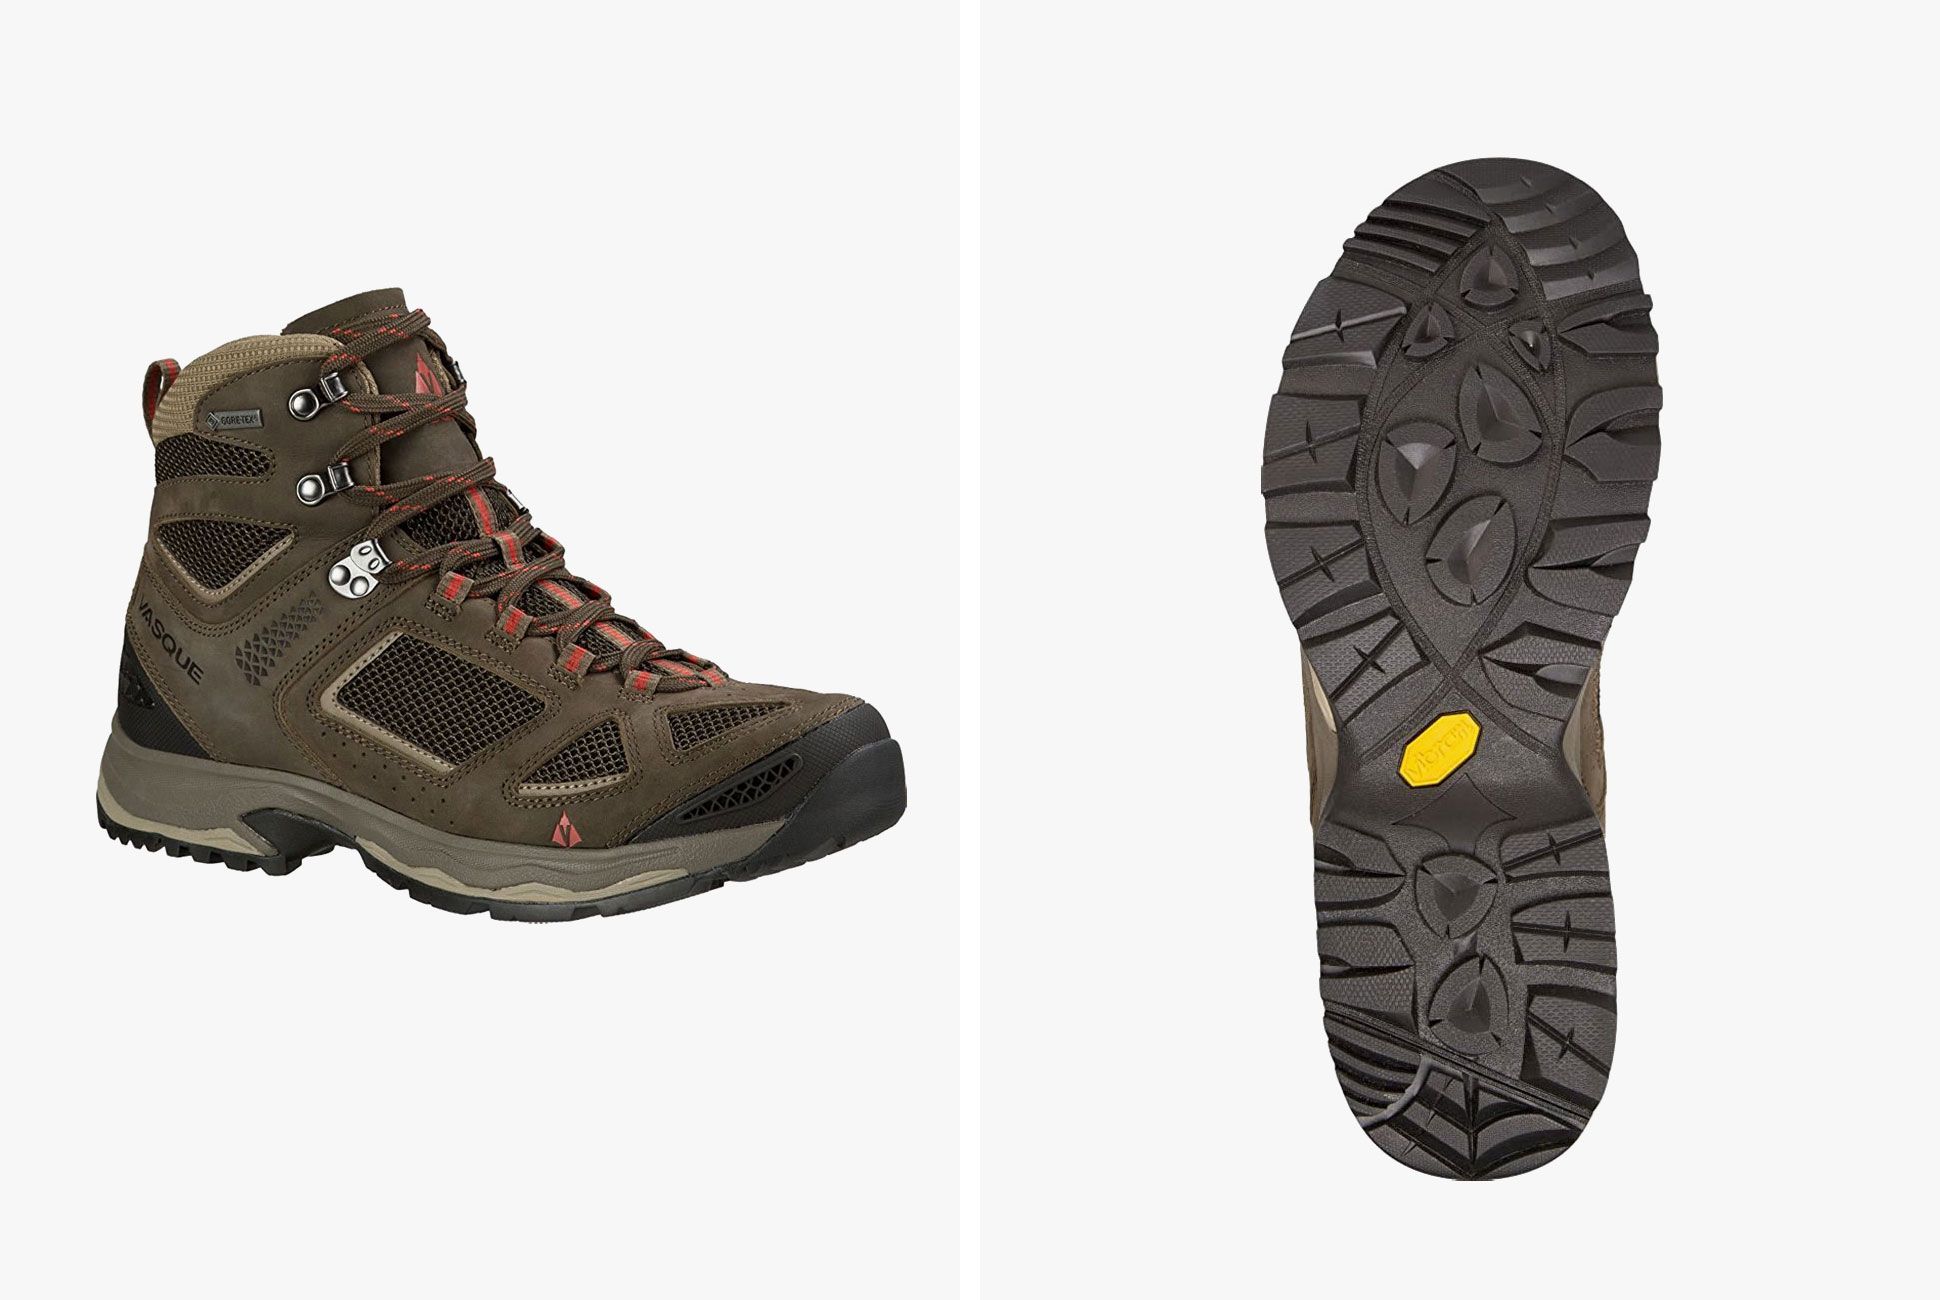 The Best Hiking Boots of 2017 - Gear Patrol